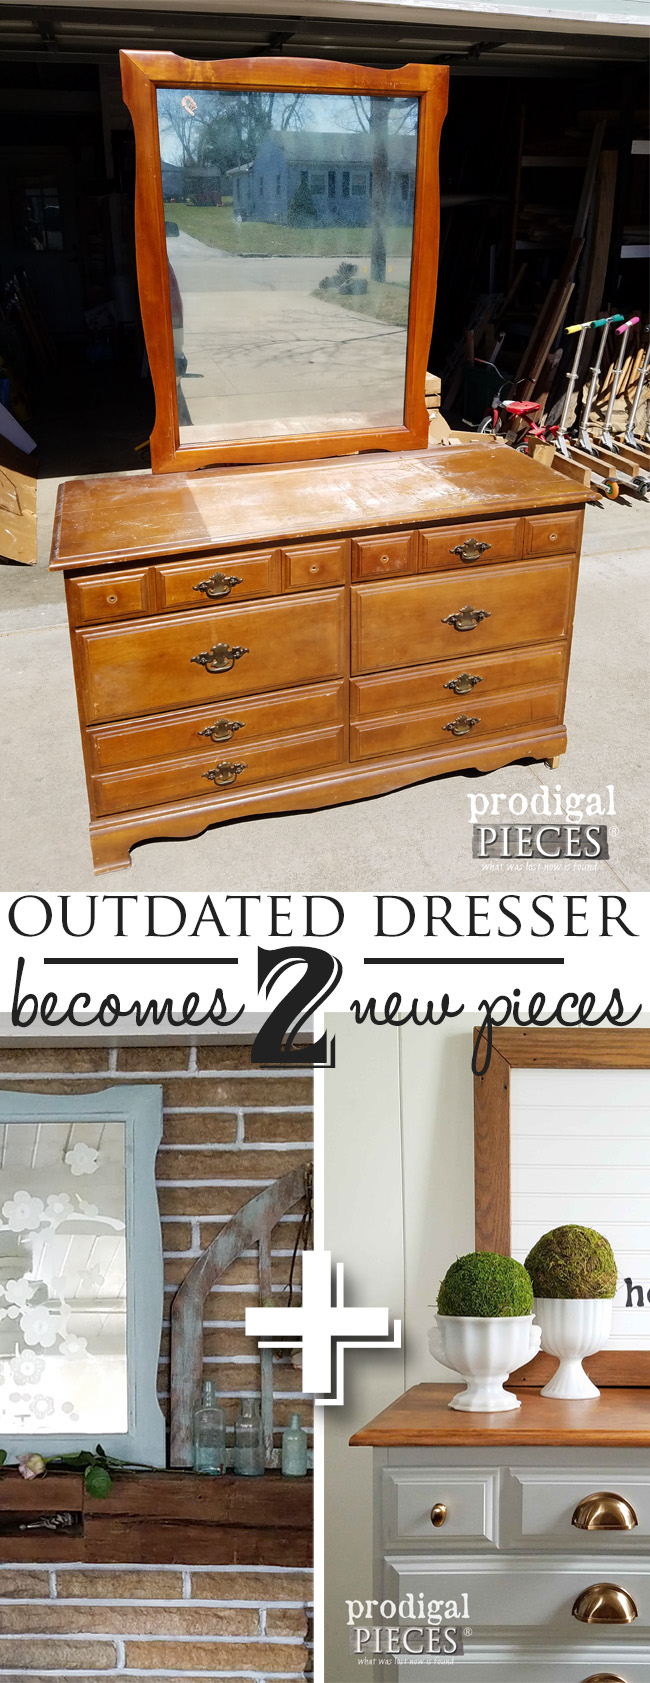 Outdated dresser becomes 2 new pieces by Prodigal Pieces | prodigalpieces.com